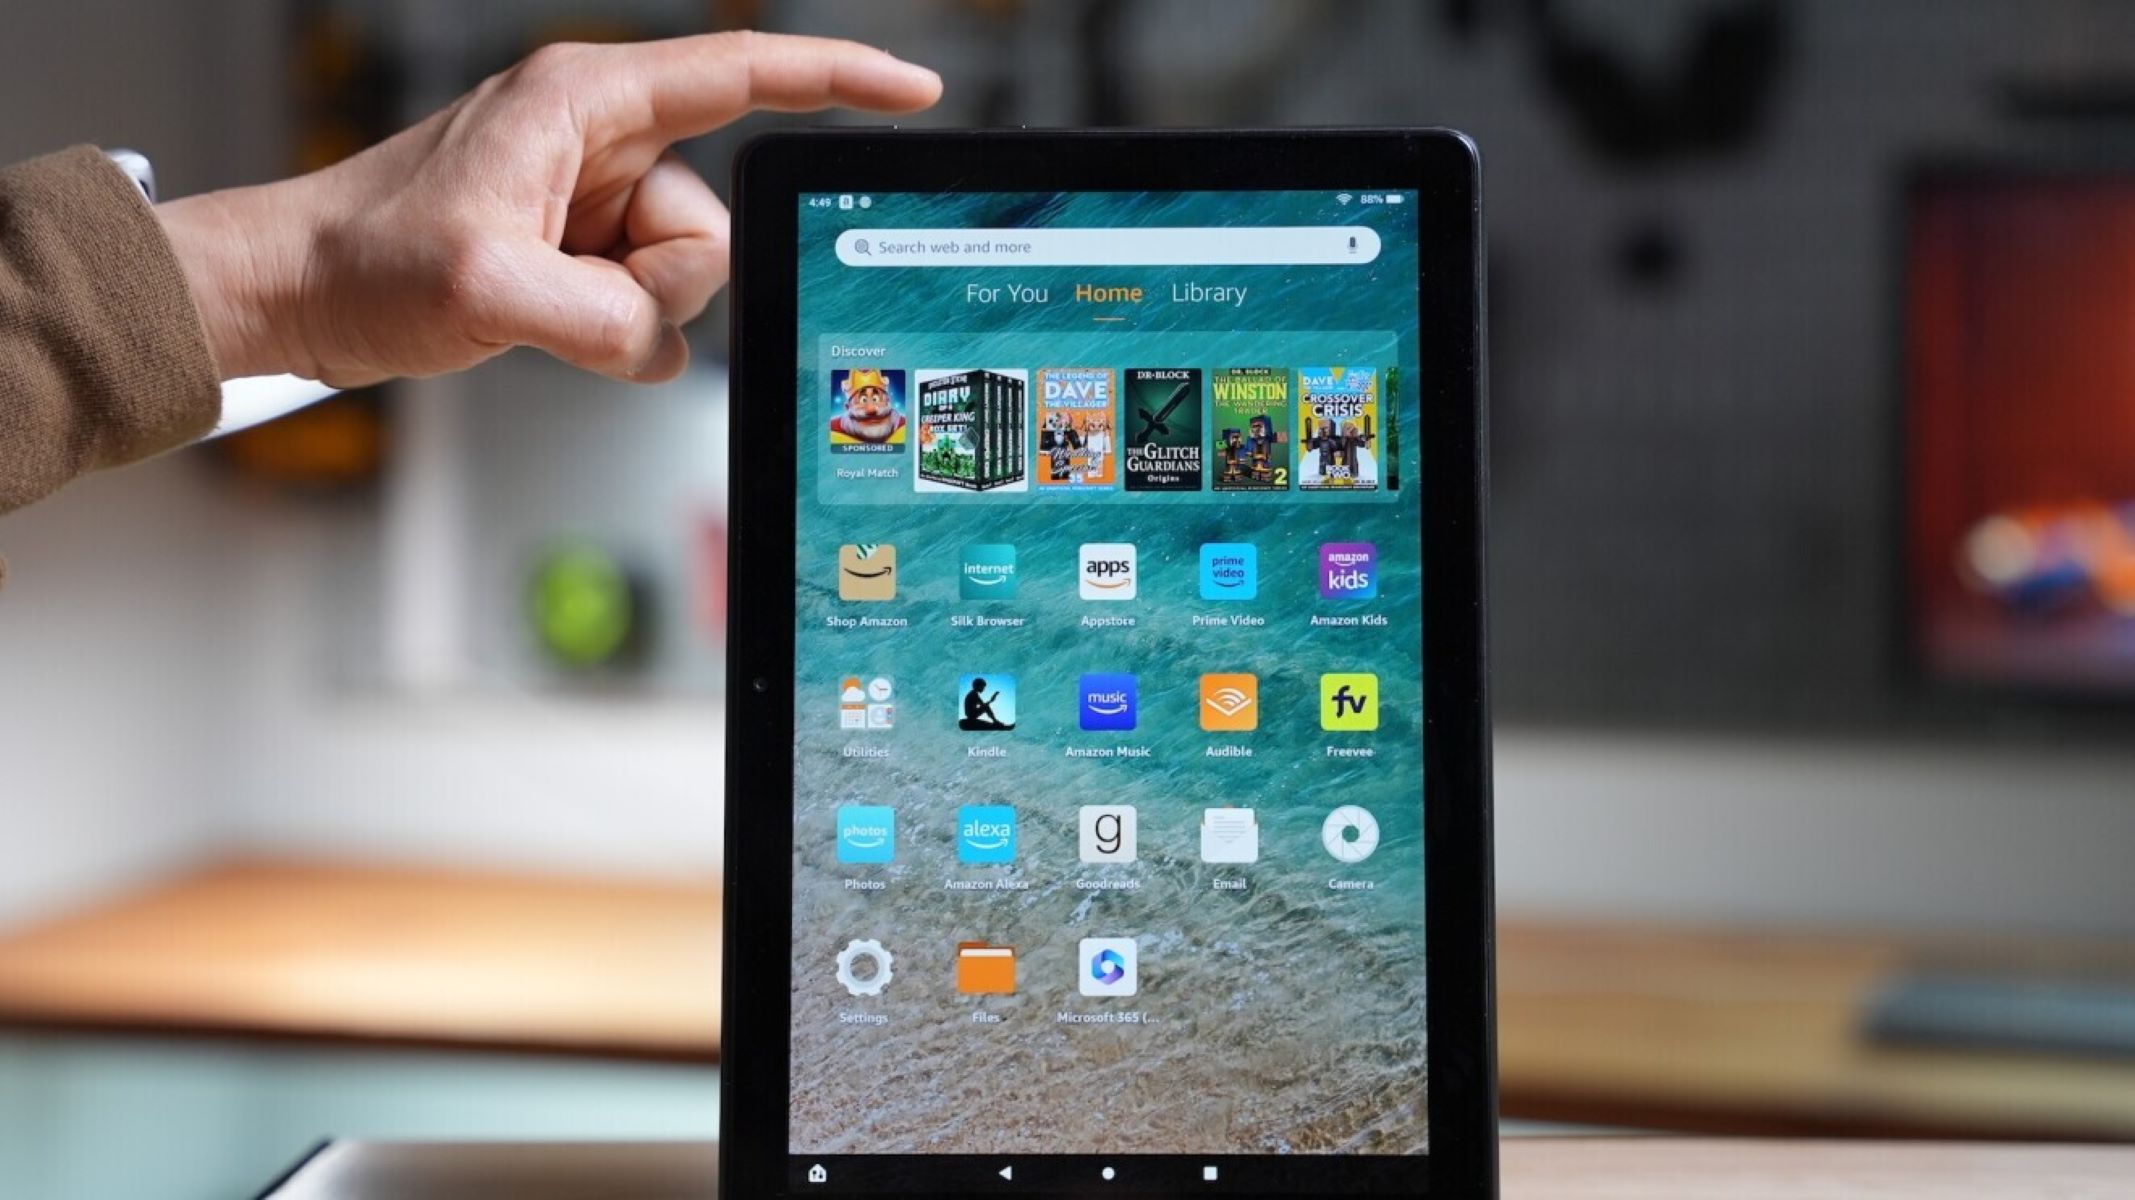 How To Reset Kindle Fire Without Password